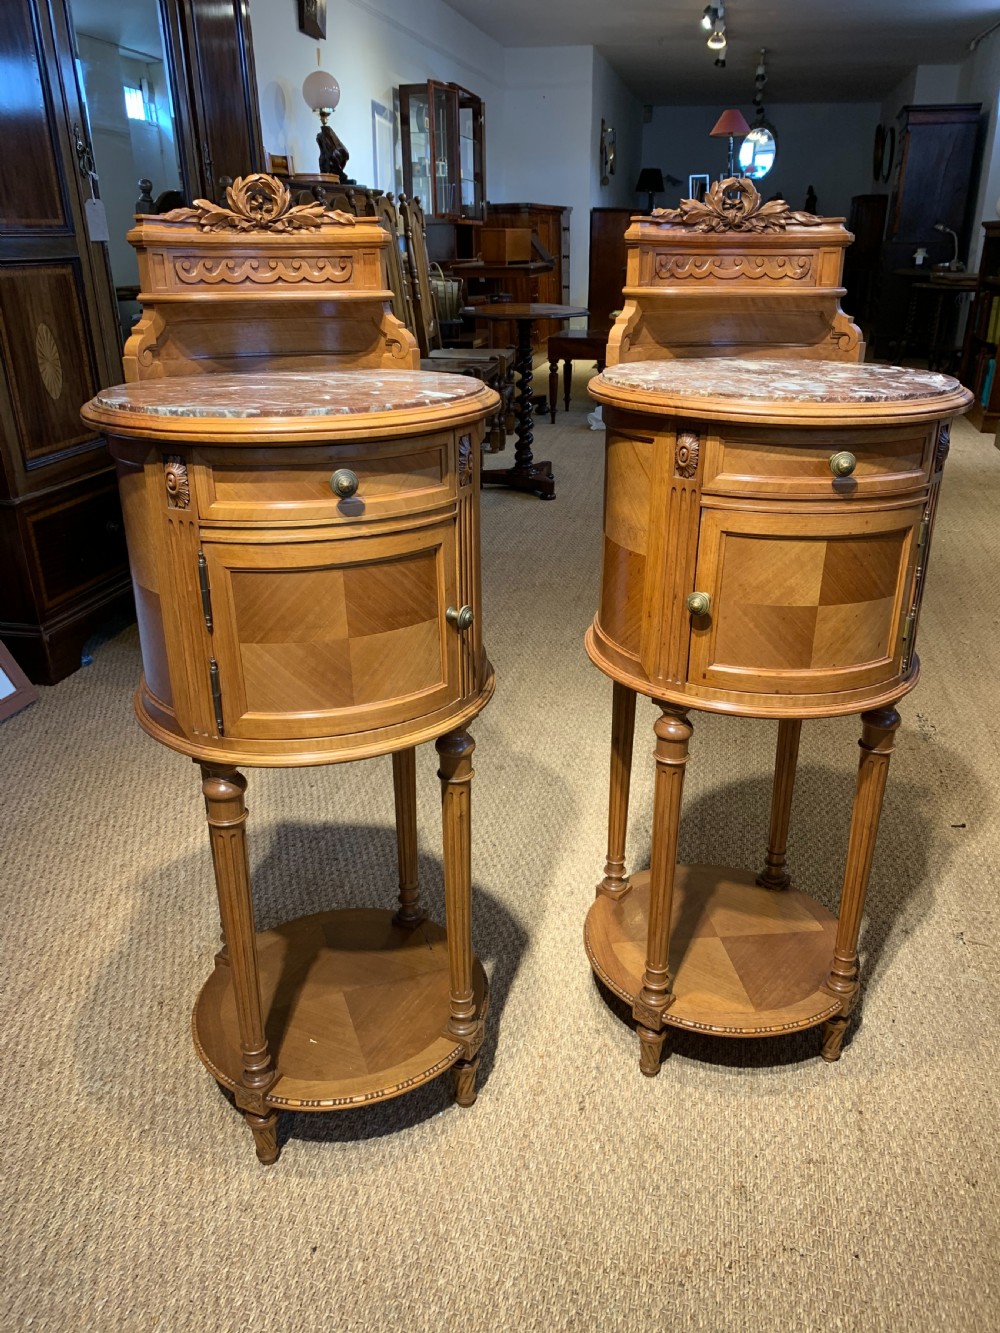 pair of bedside cabinets